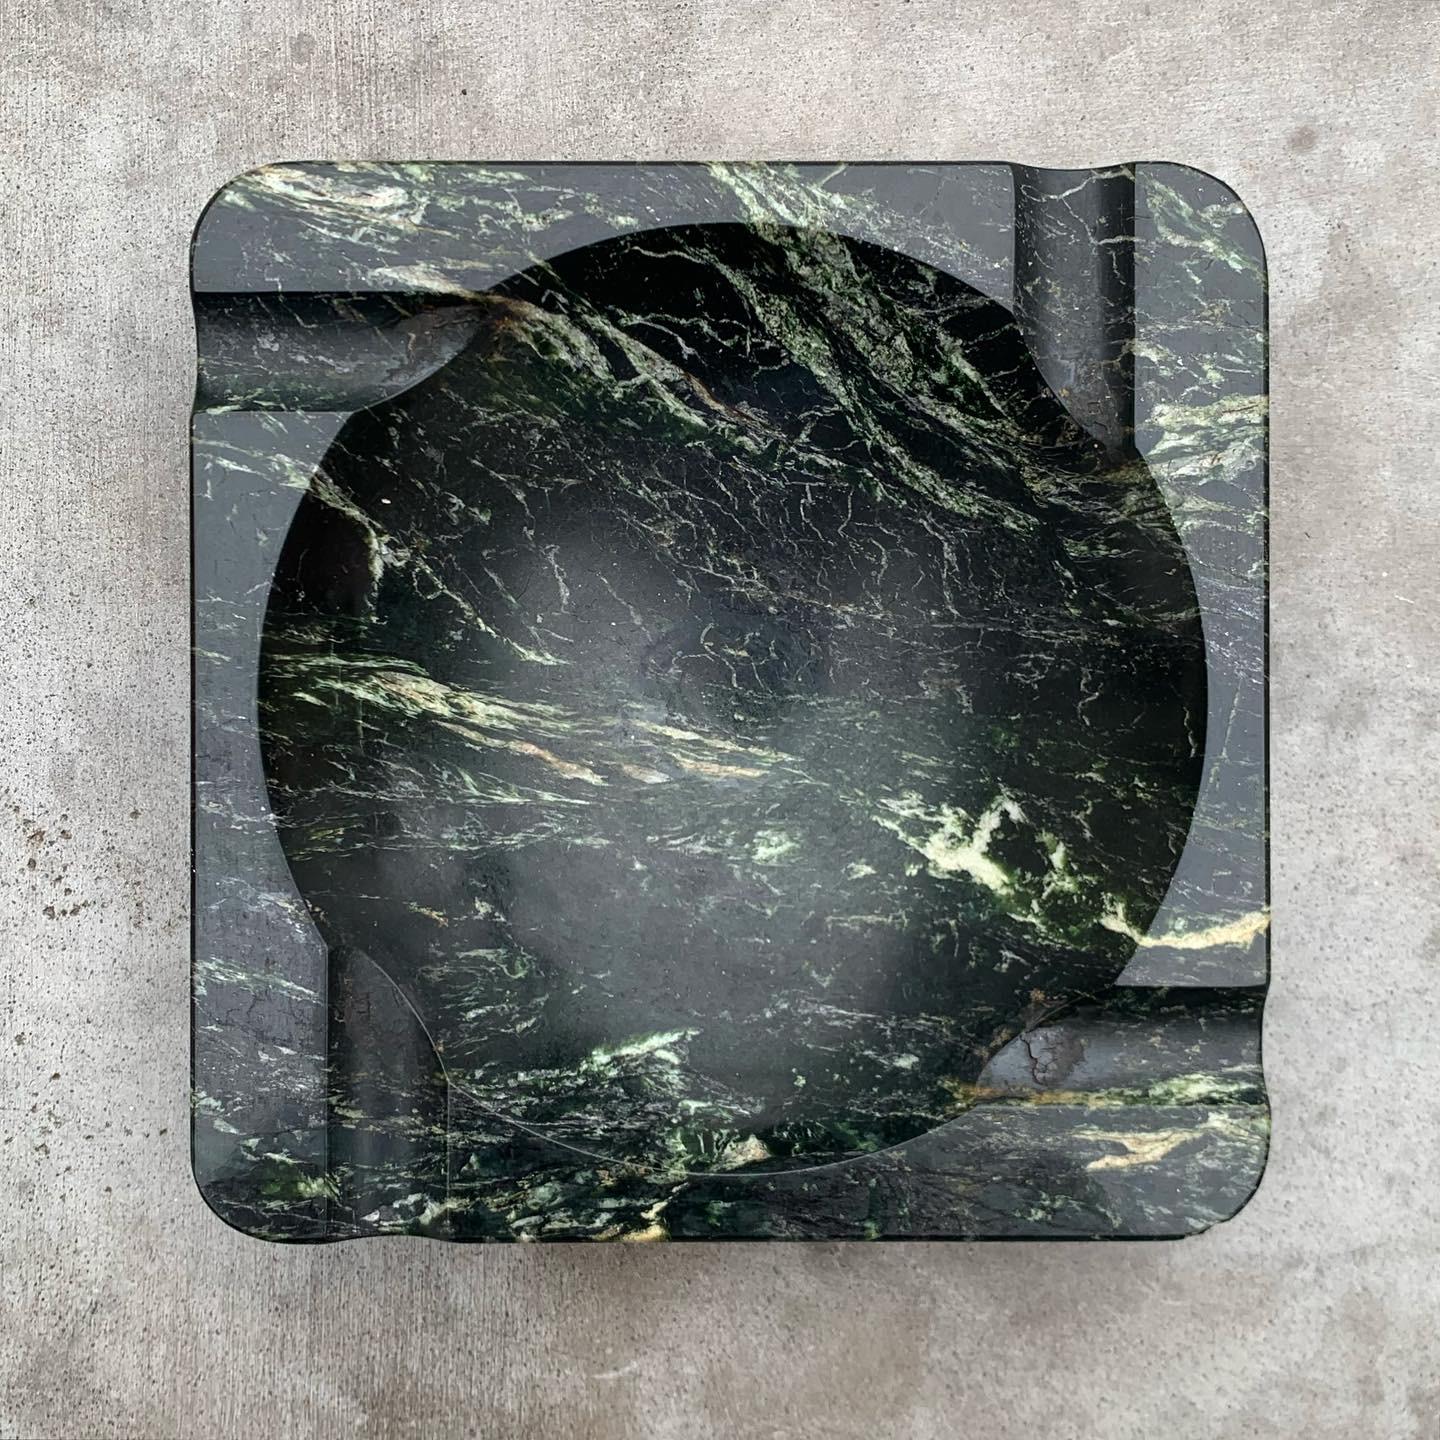 Vintage Mid-Century Modern marble ashtray in dark pine green with ivory veining.